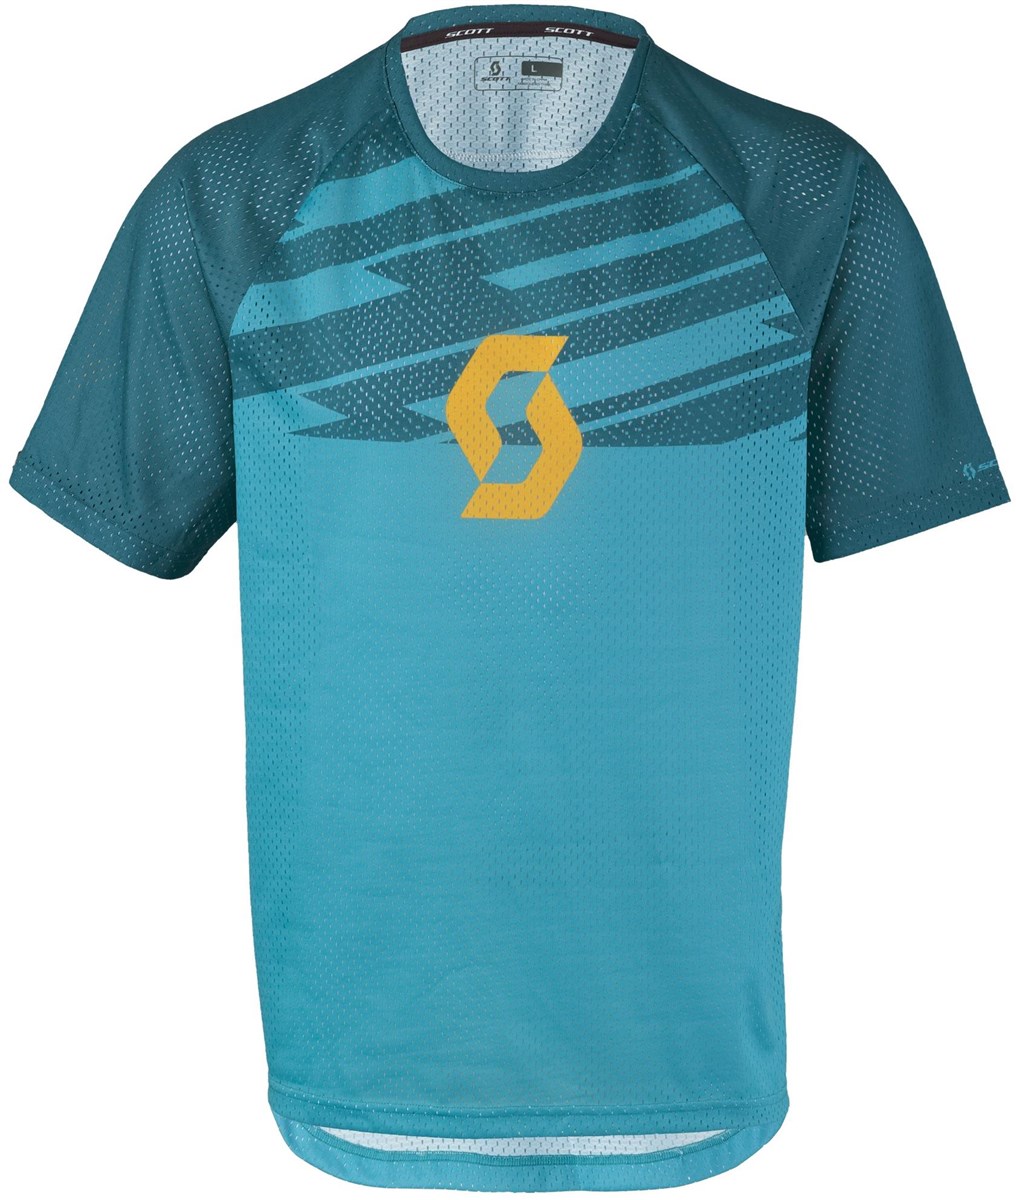 Scott Trail DH Short Sleeve Cycling Shirt / Jersey product image